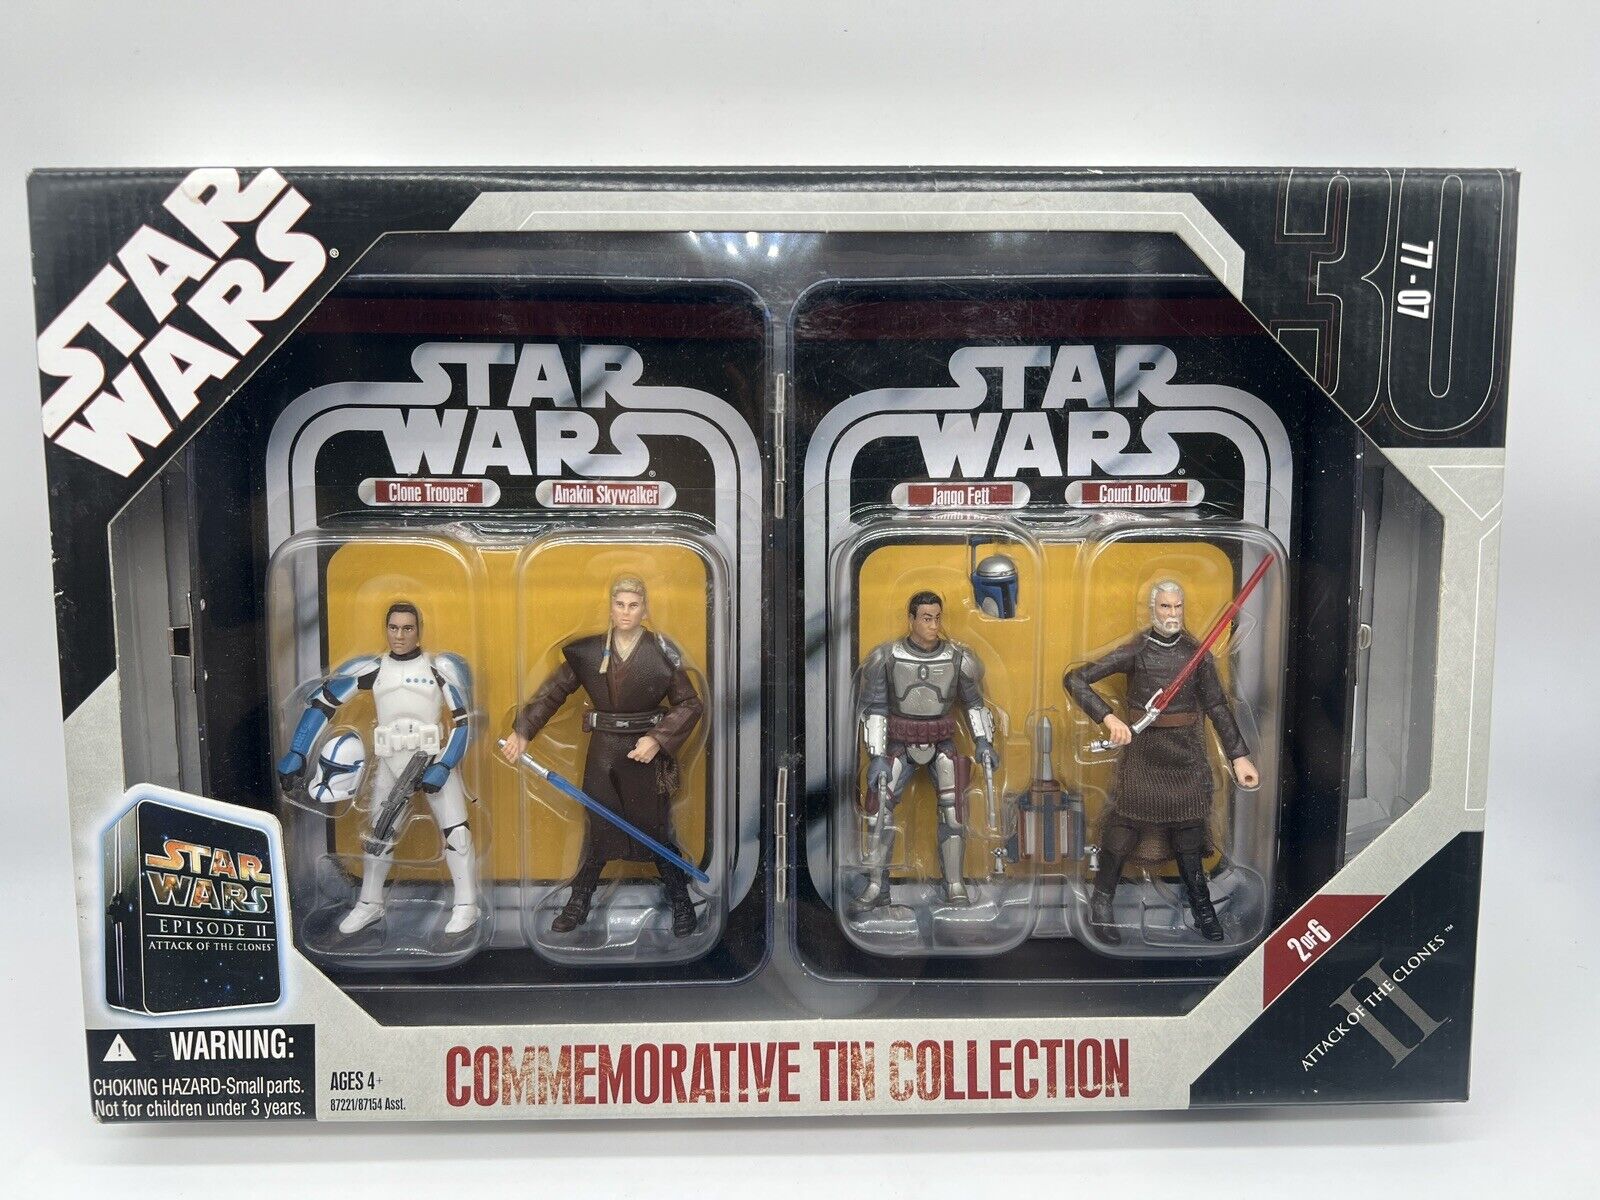 New - 2006 Hasbro Star Wars II Attack of The Clones Commemorative Tin Collection